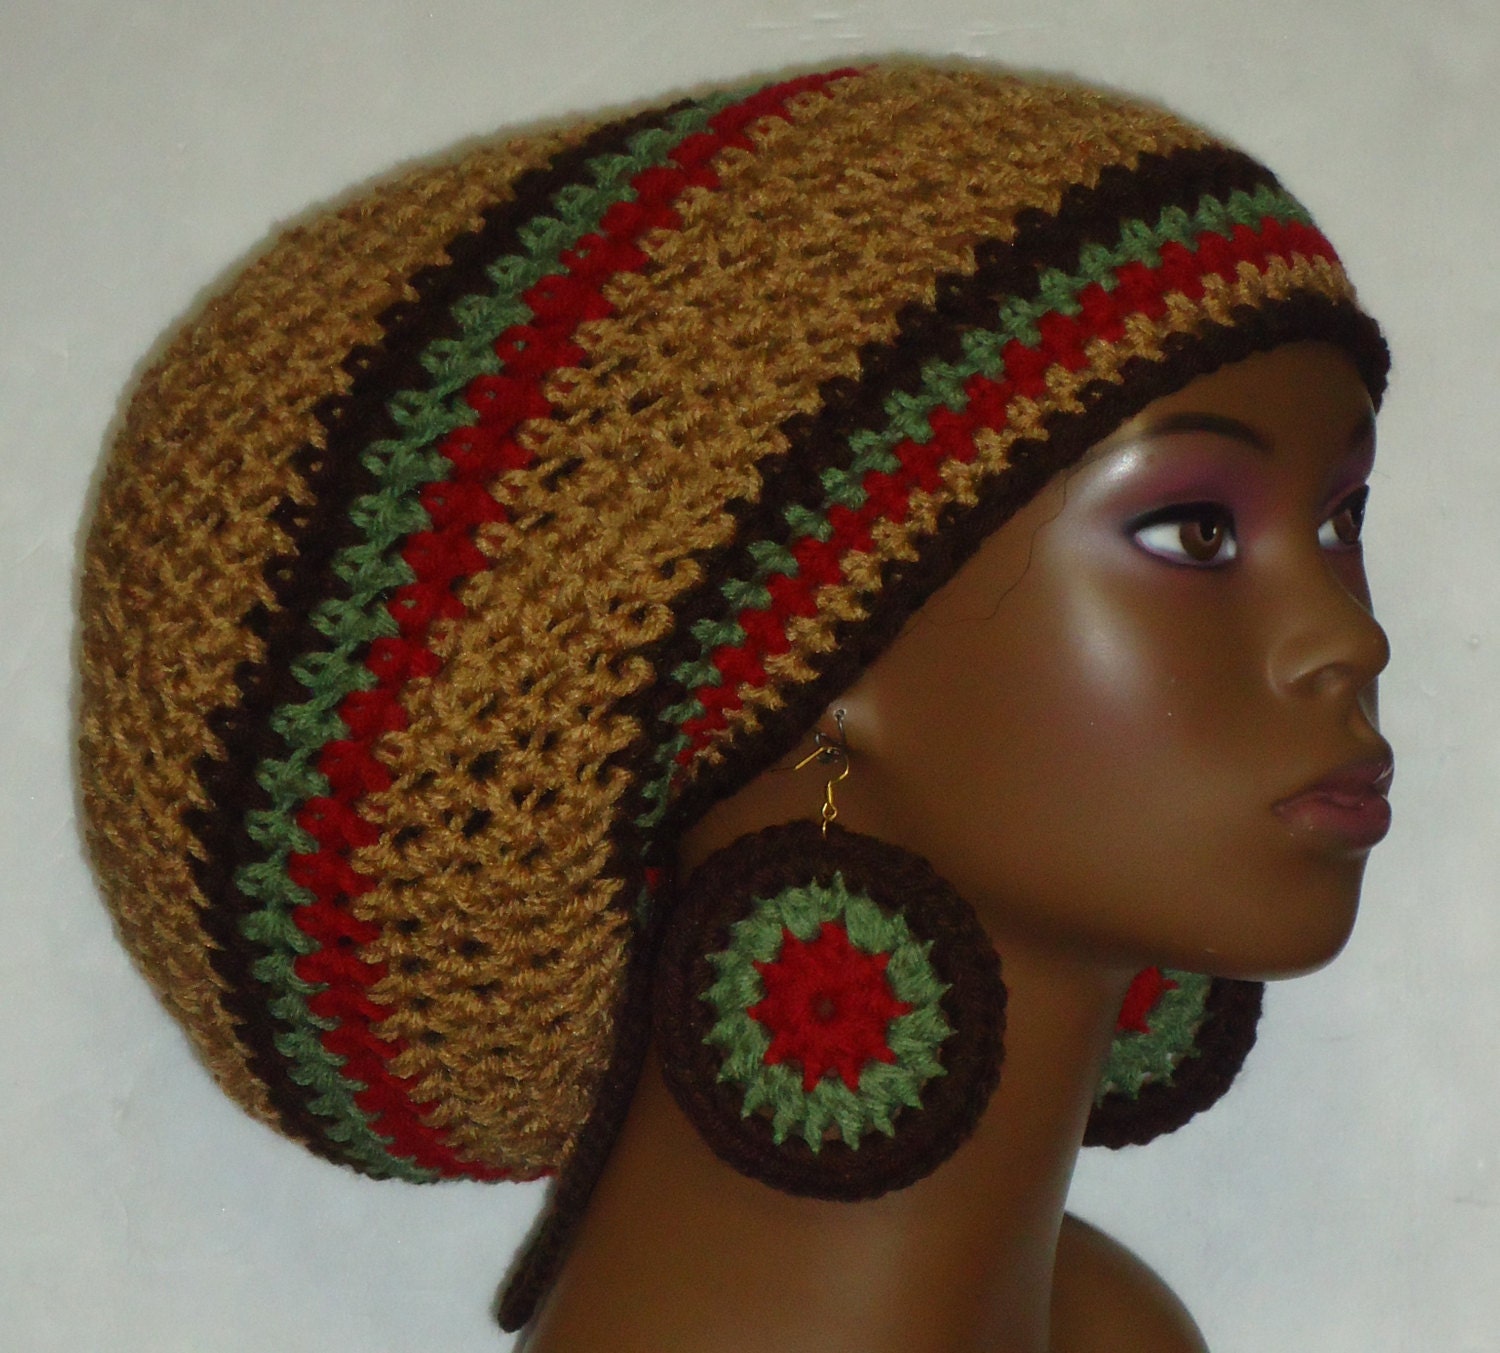 Earth Tone Crochet Large Tam Cap Hat with Drawstring by RazondaLee